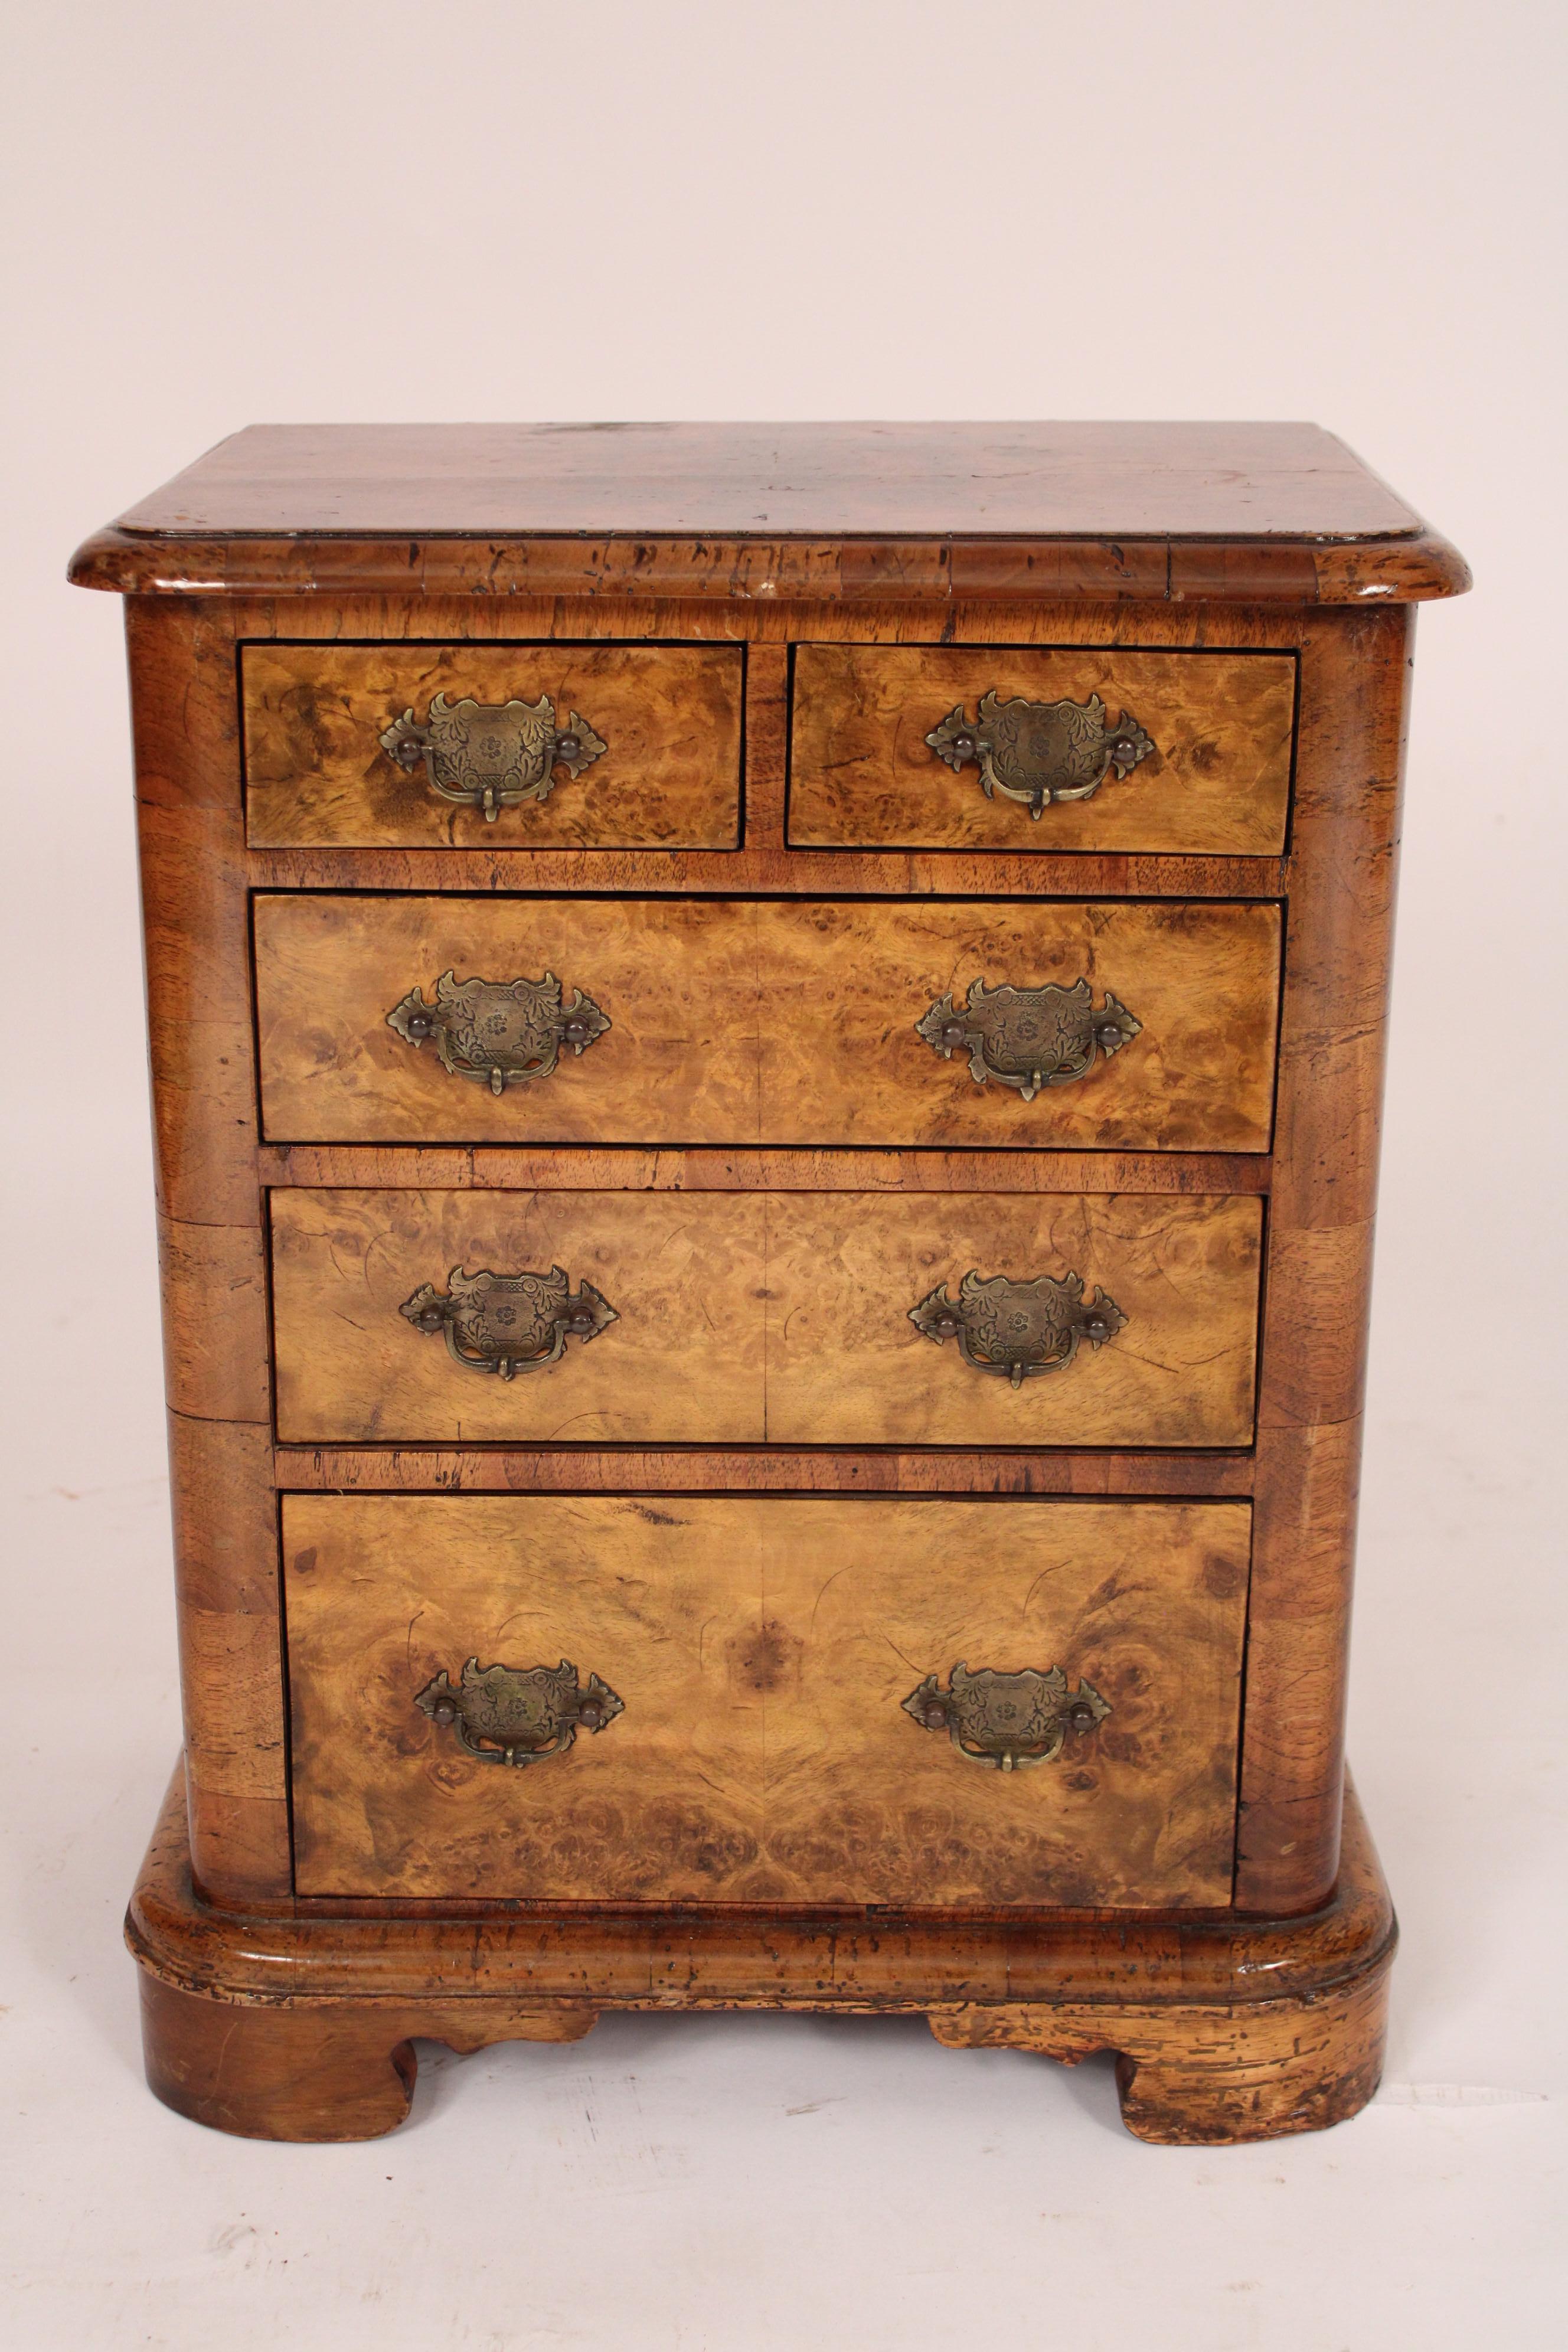 Diminutive Edwardian style thuya and walnut chest of drawers, circa 1900. With a thuya thumb molded rectangular top, two thuya top drawers over 3 graduated lower drawers all with brass hardware,  walnut sides, resting on a molded base with bracket